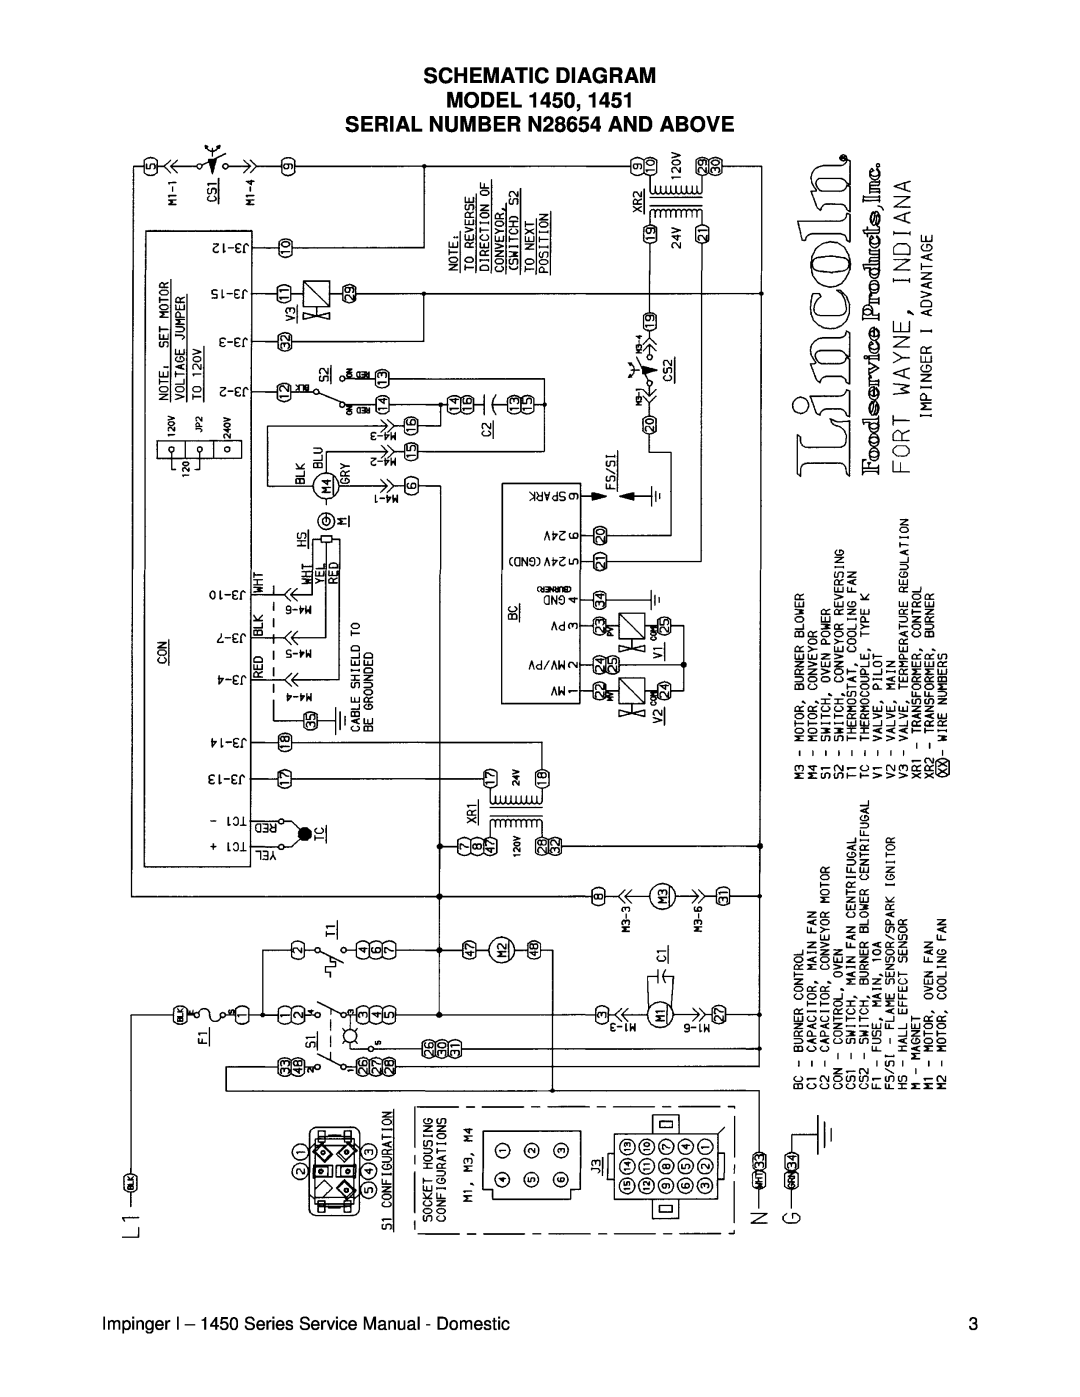 Cub Cadet 1451, 1450 service manual Schematic Diagram Model, SERIAL NUMBER N28654 AND ABOVE 